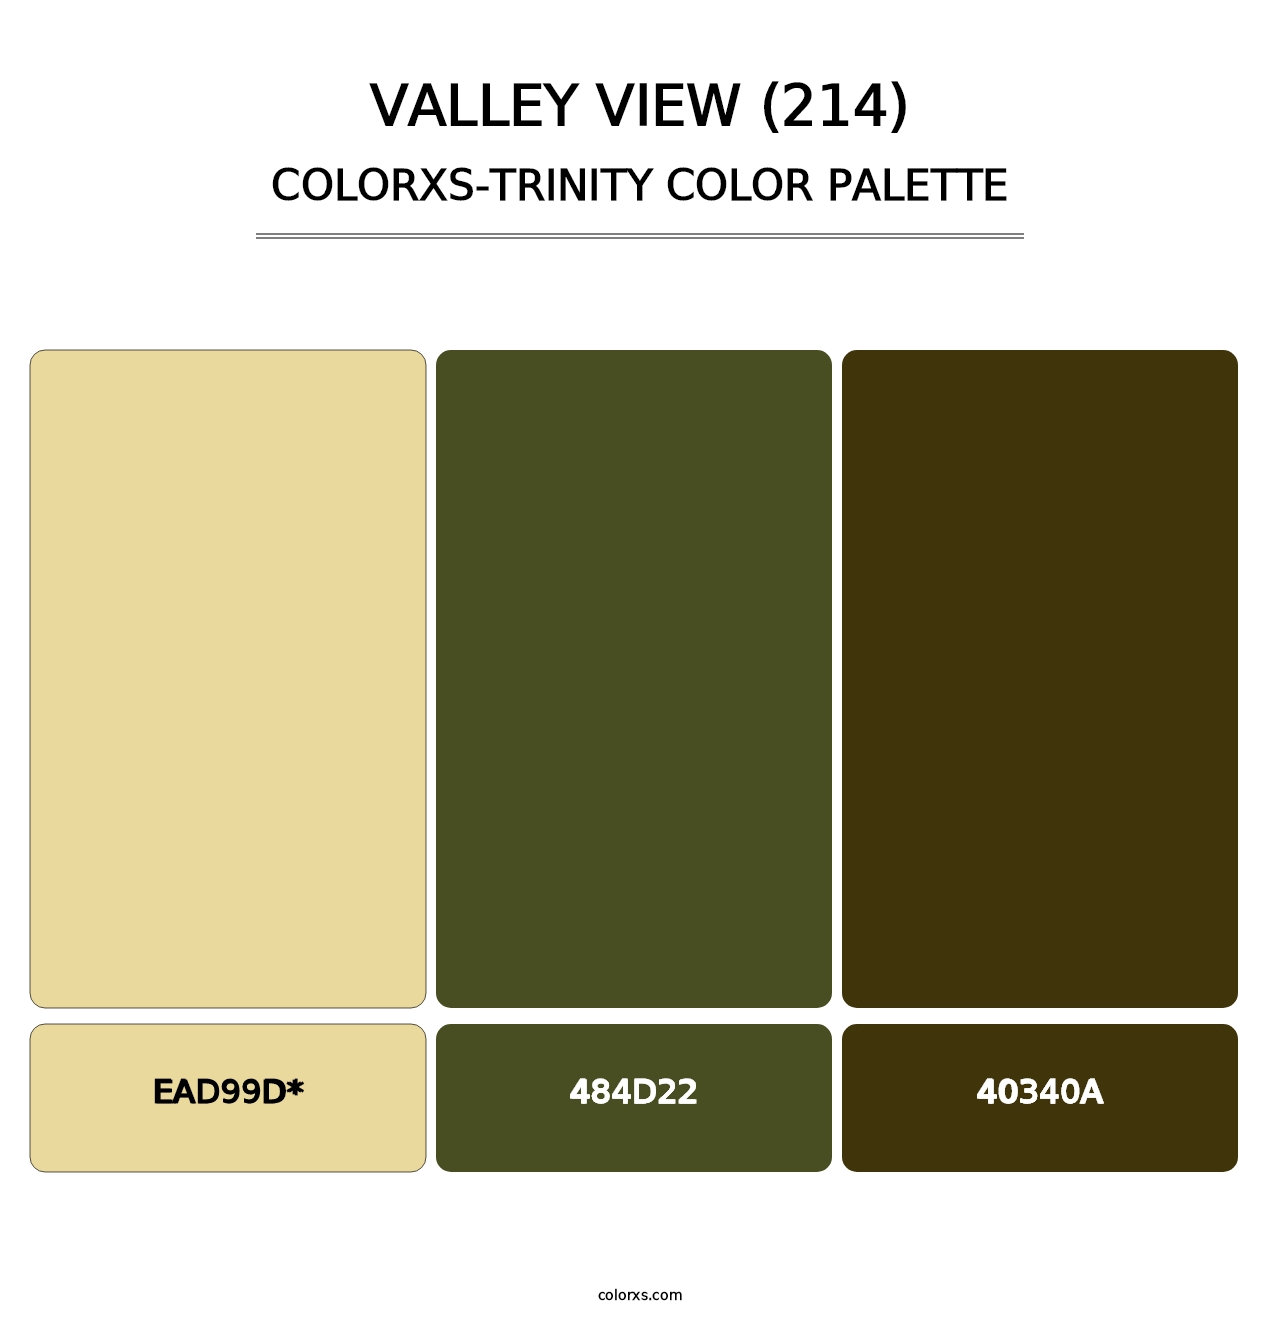 Valley View (214) - Colorxs Trinity Palette